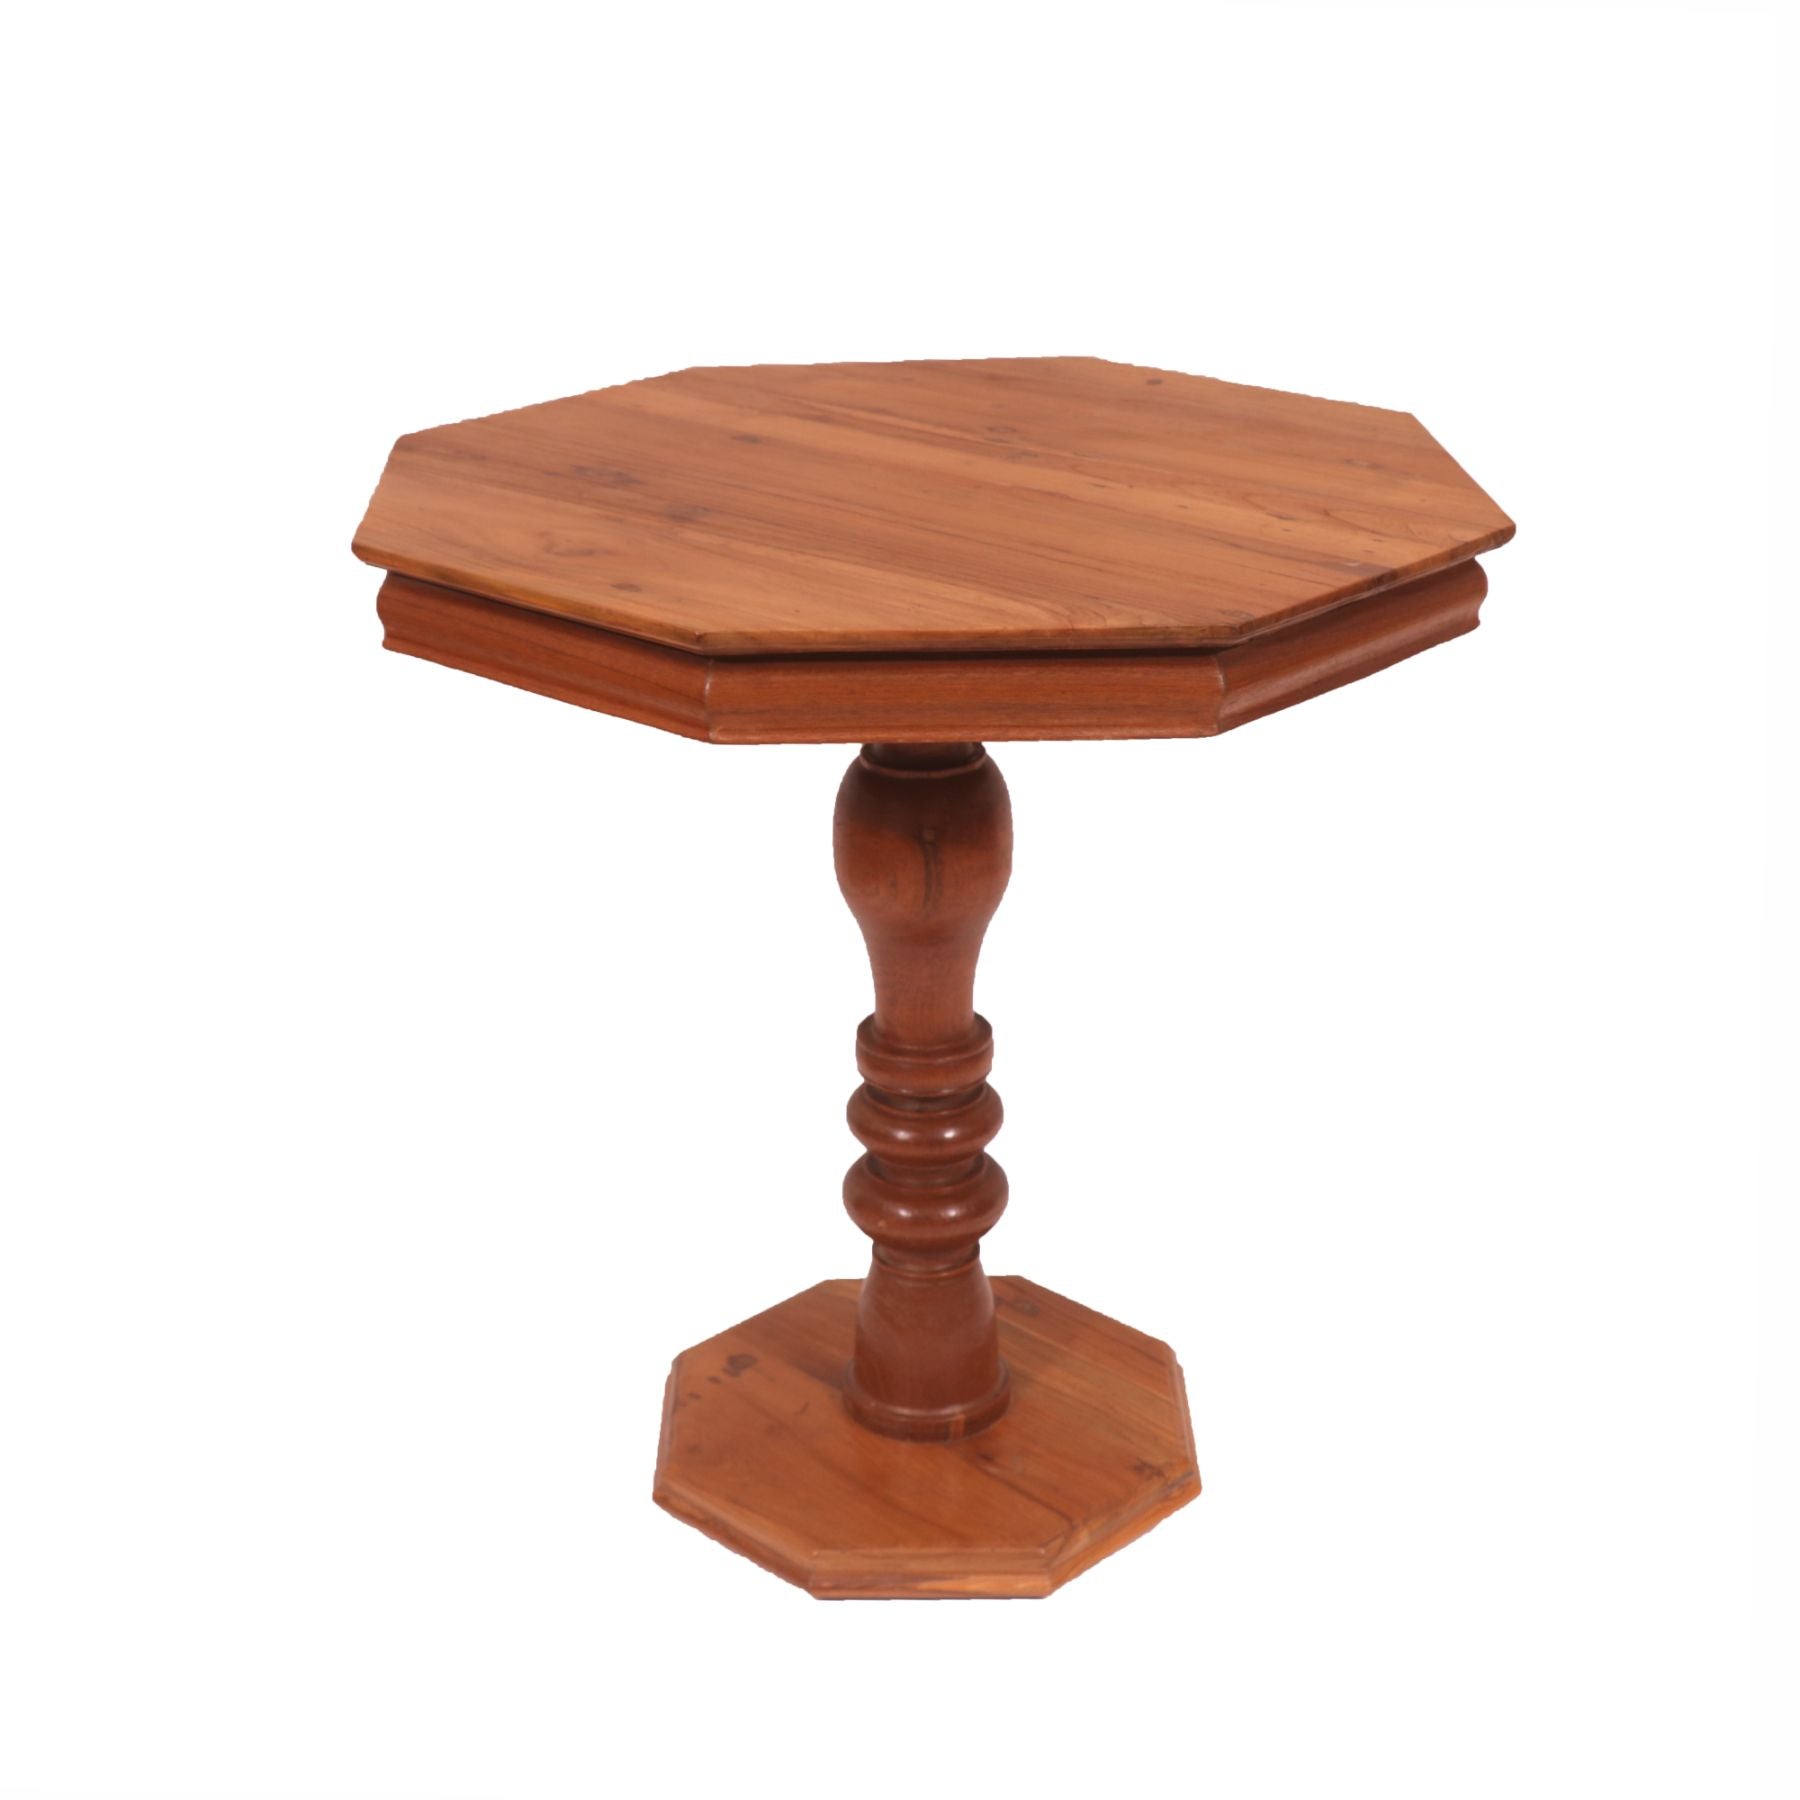 Teak Polygon Dining Table Dining Table